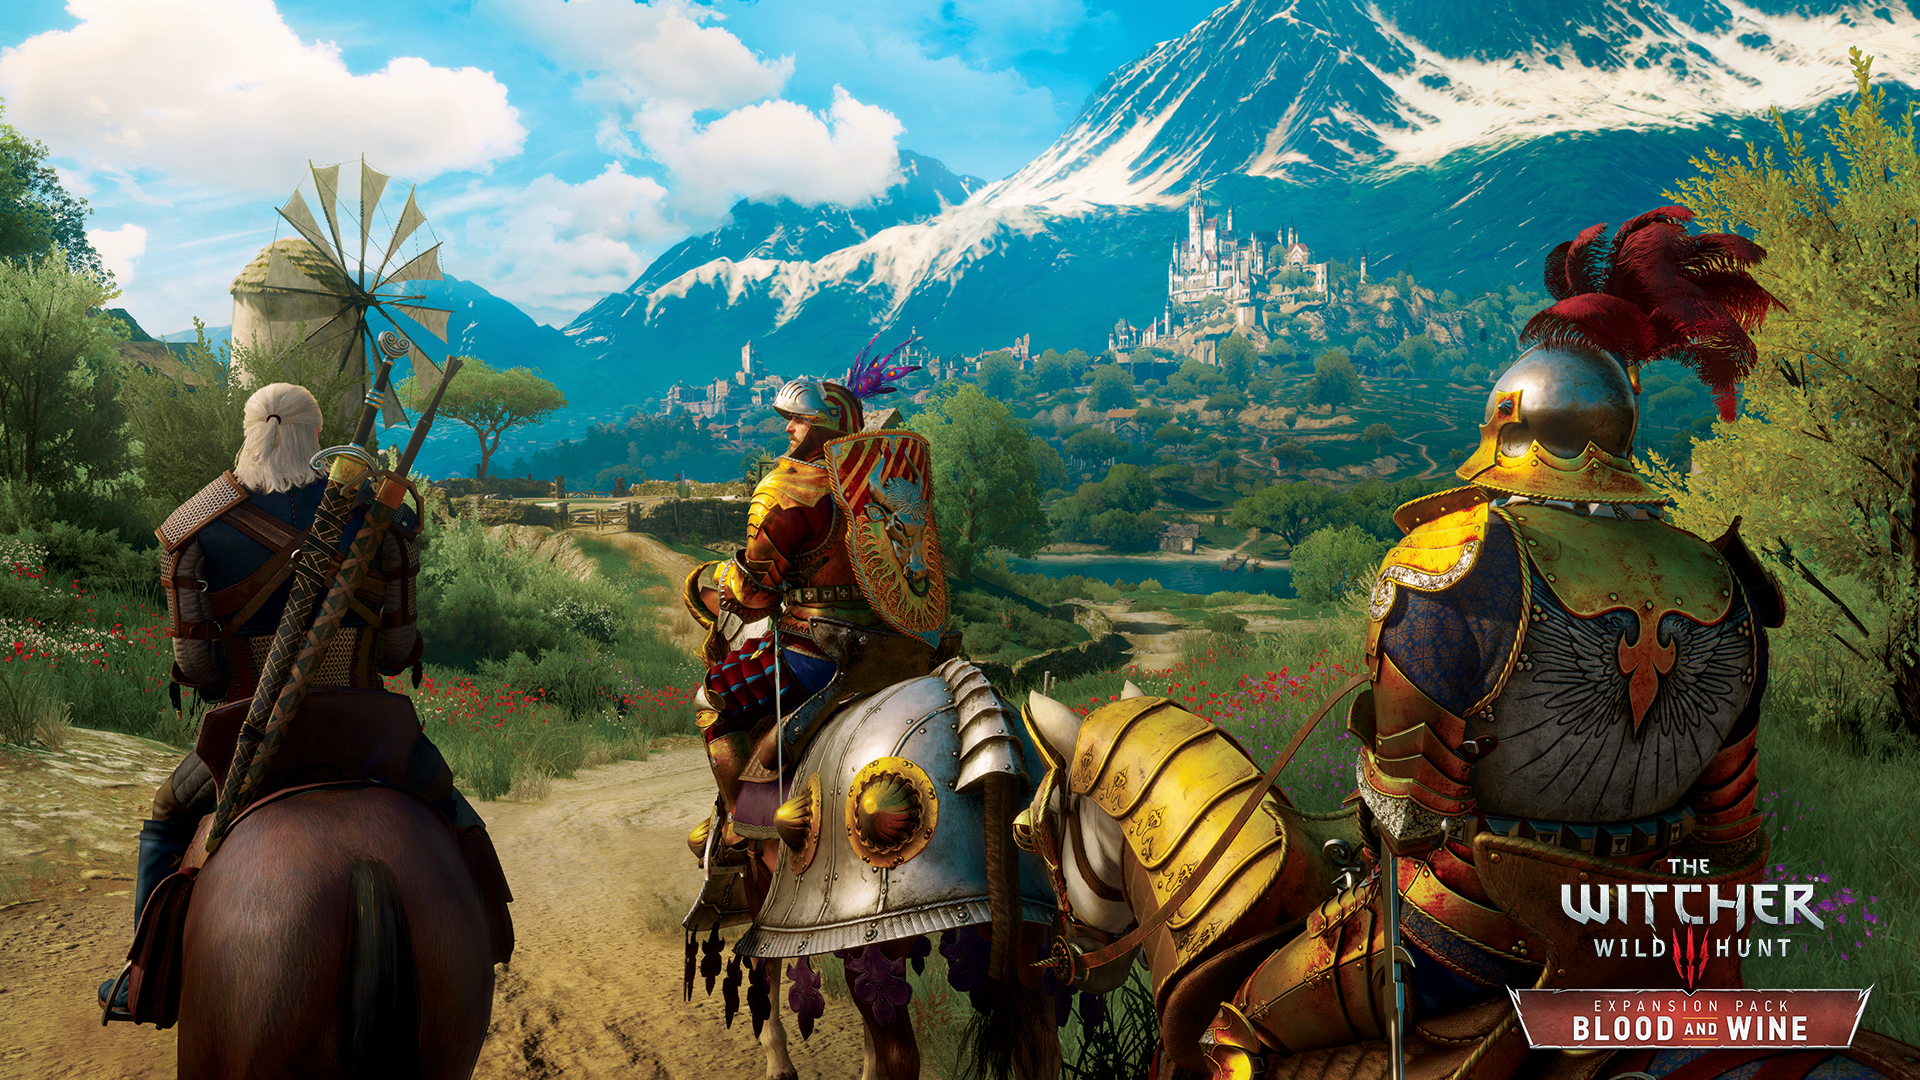 The_Witcher_3_Wild_Hunt_Blood_and_Wine_Toussaint_is_a_beautiful_place_RGB_EN.png